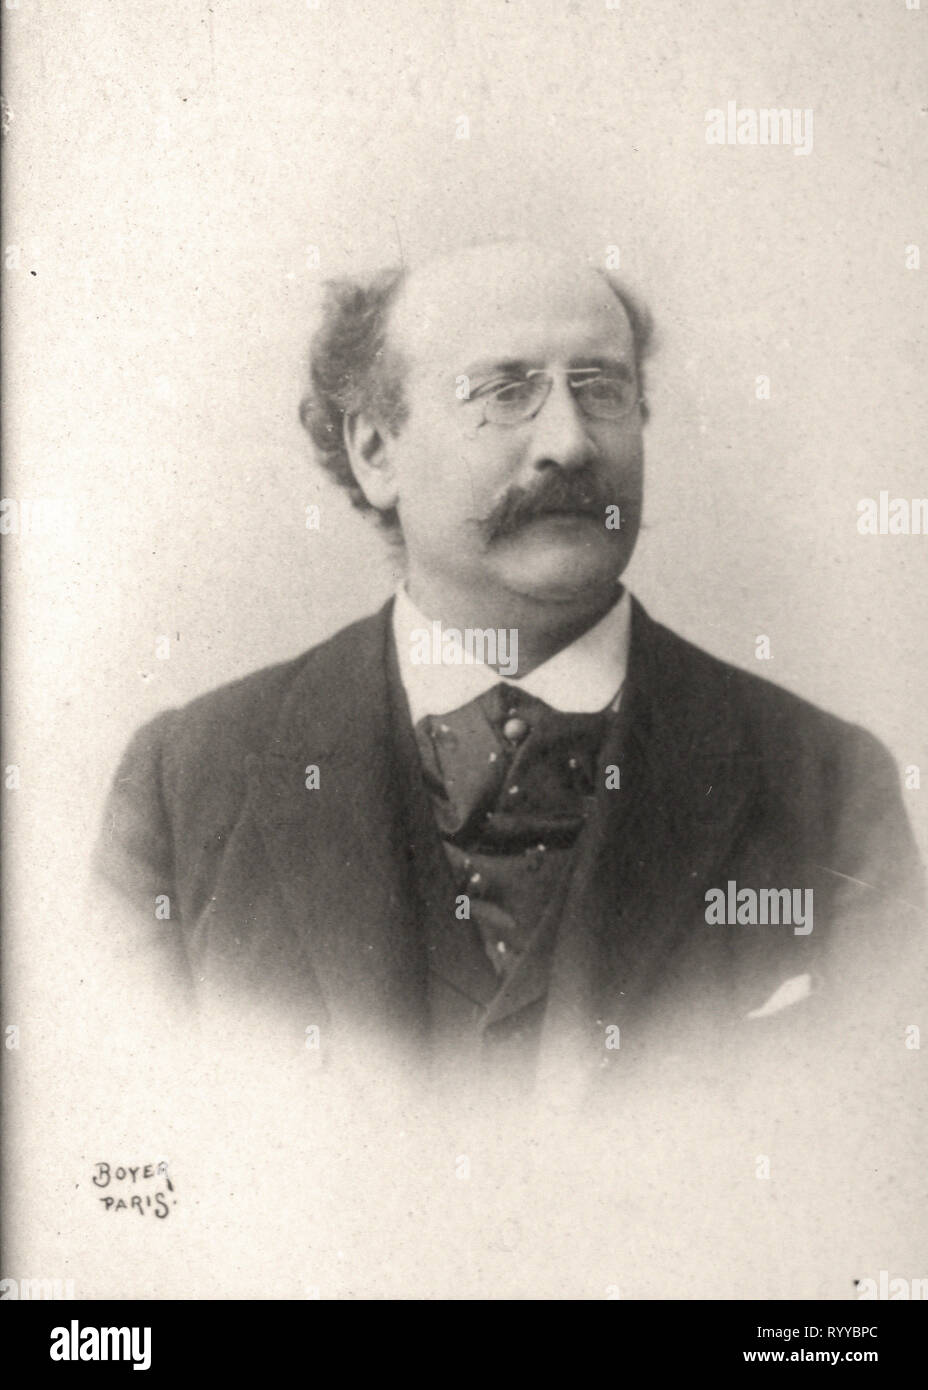 Photographic Portrait Of Planquette   From Collection Félix Potin, Early 20th Century Stock Photo